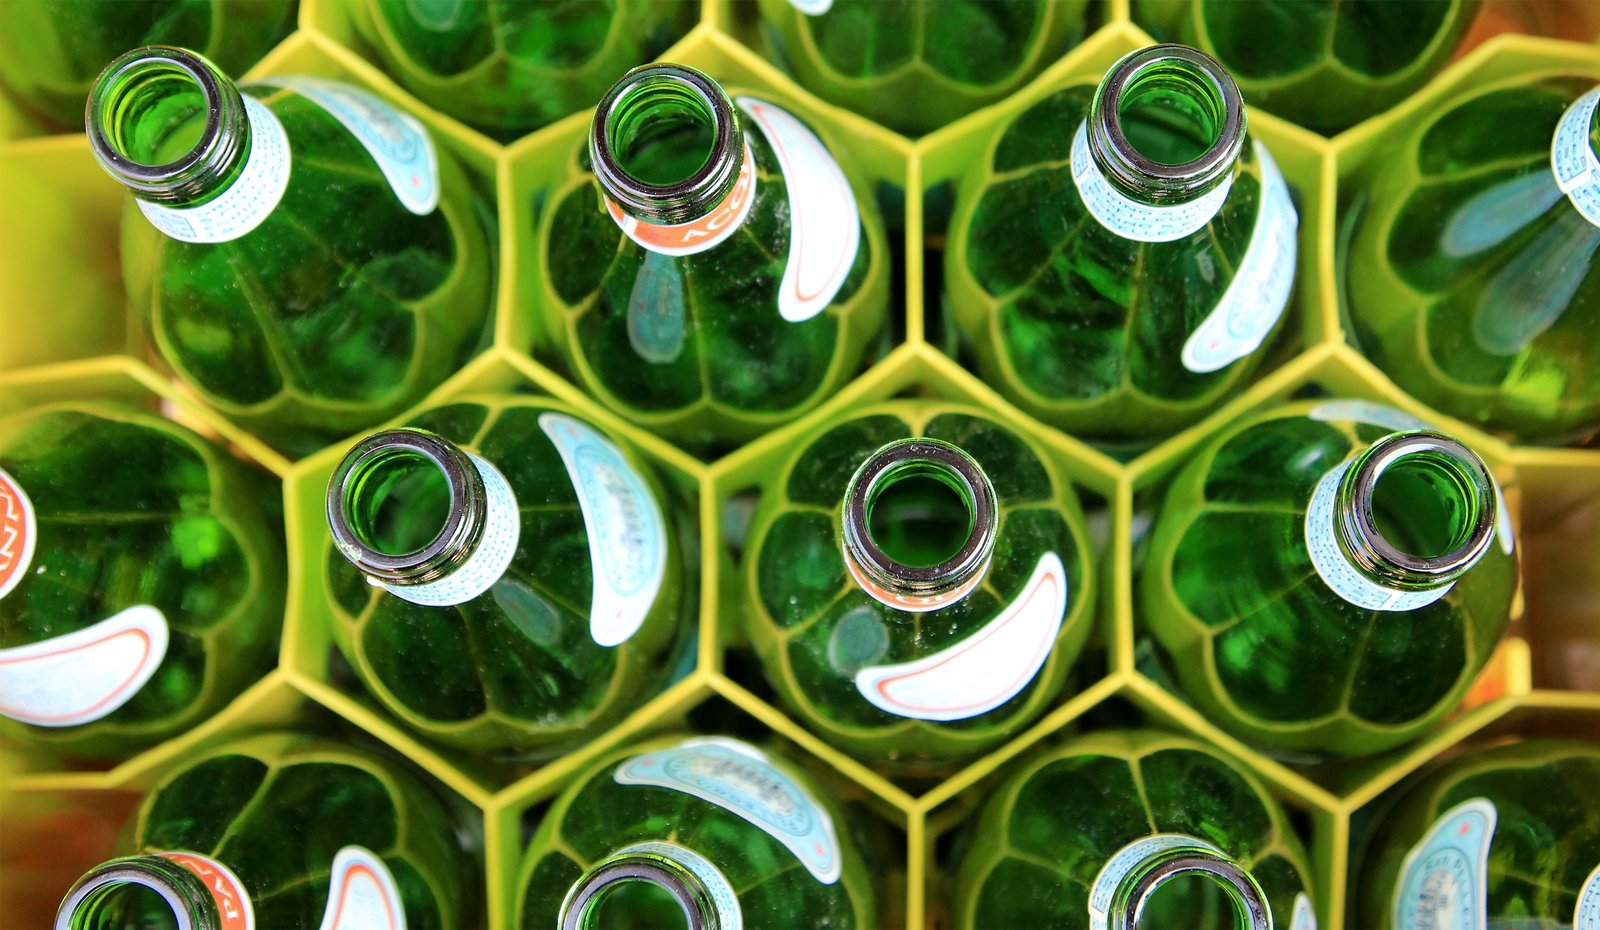 Five measures for more sustainability in glass packaging